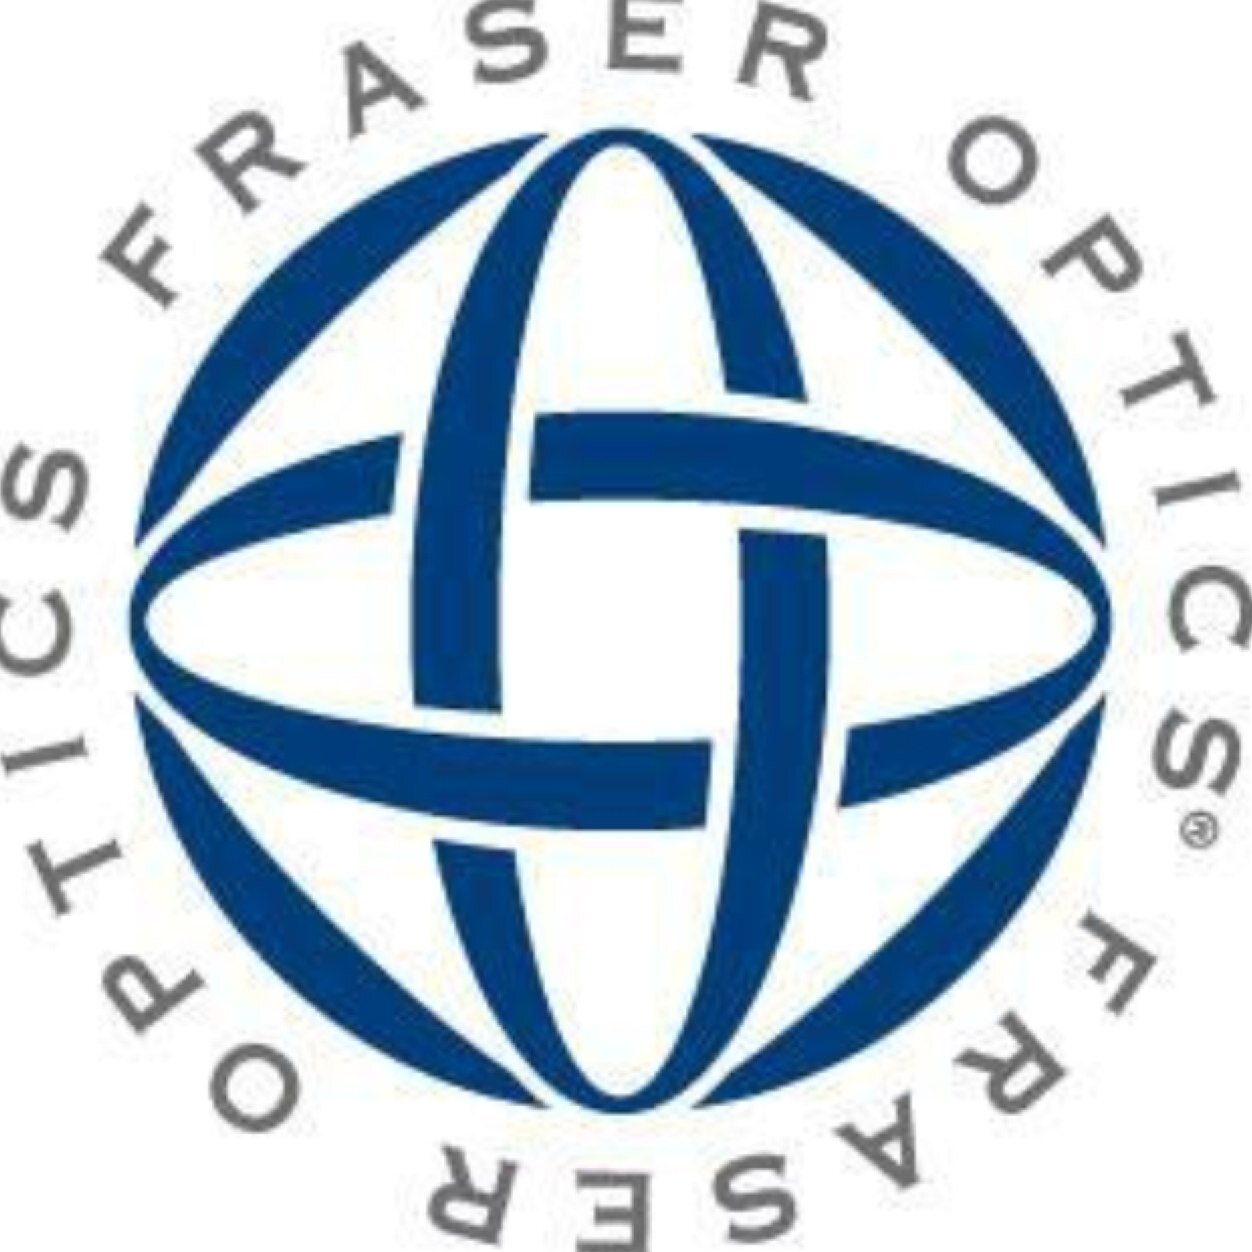 Fraser Optics’ products, uniquely engineered with STEDI-EYE® Technology, give professionals and serious users a competitive edge.